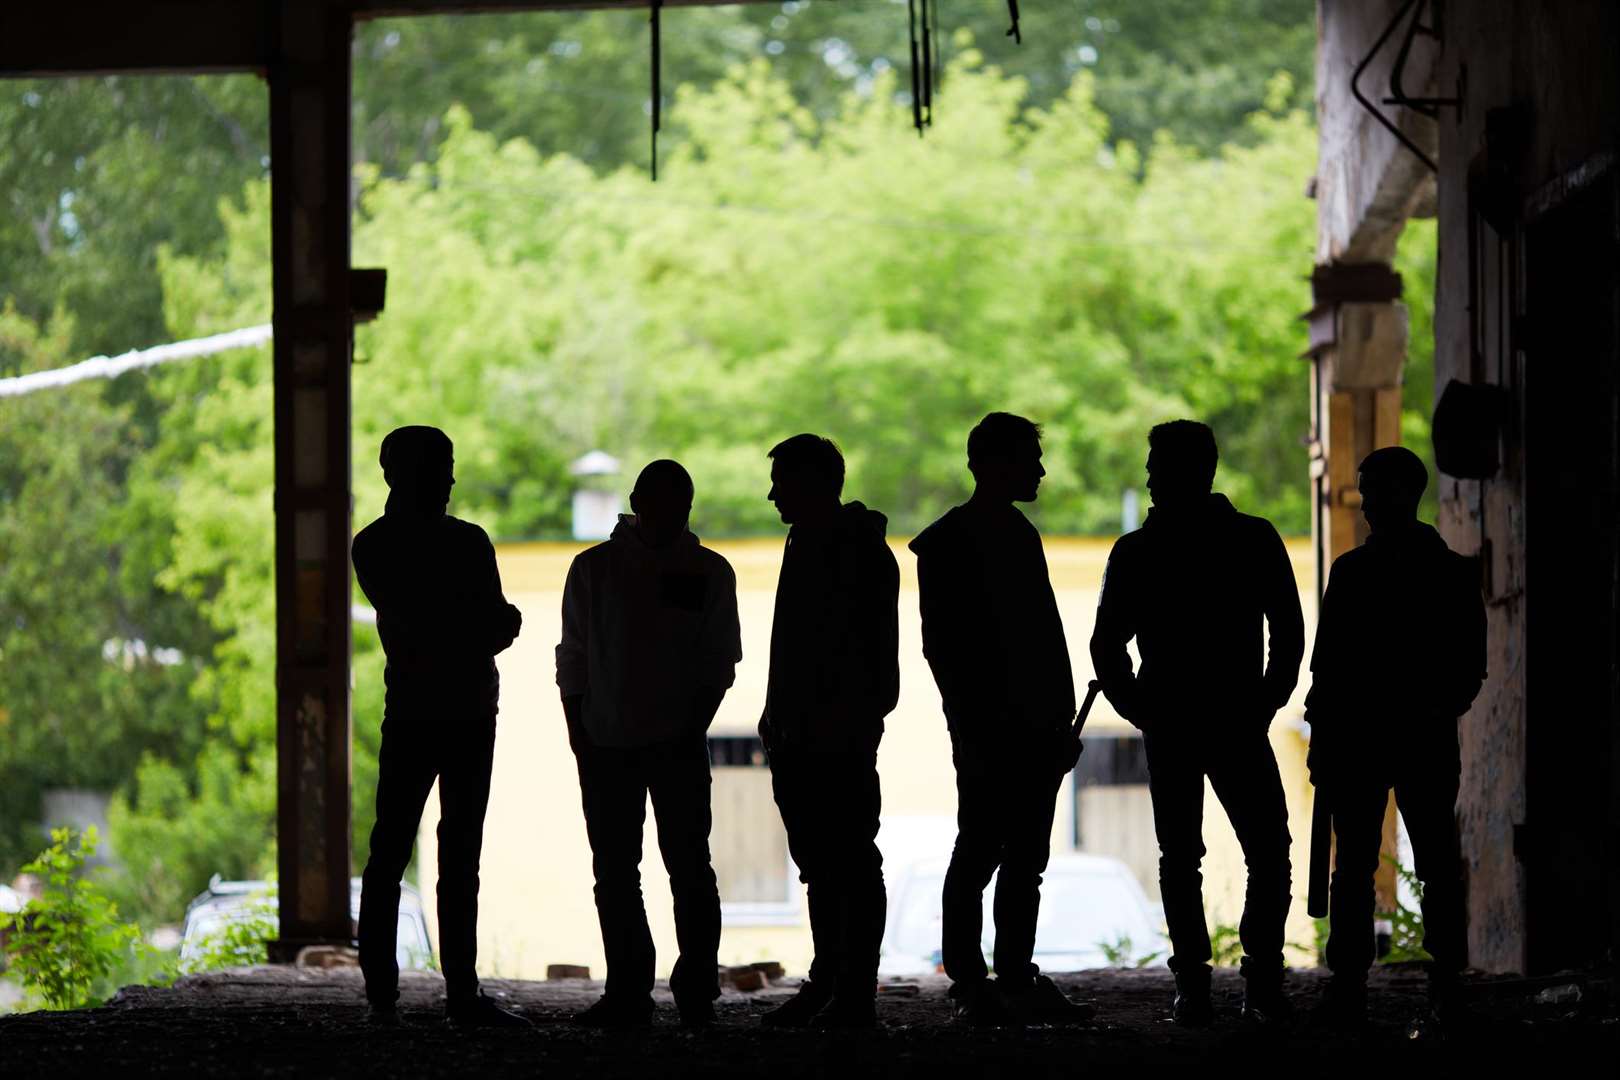 'Feral' youngsters are being preyed upon by gangs